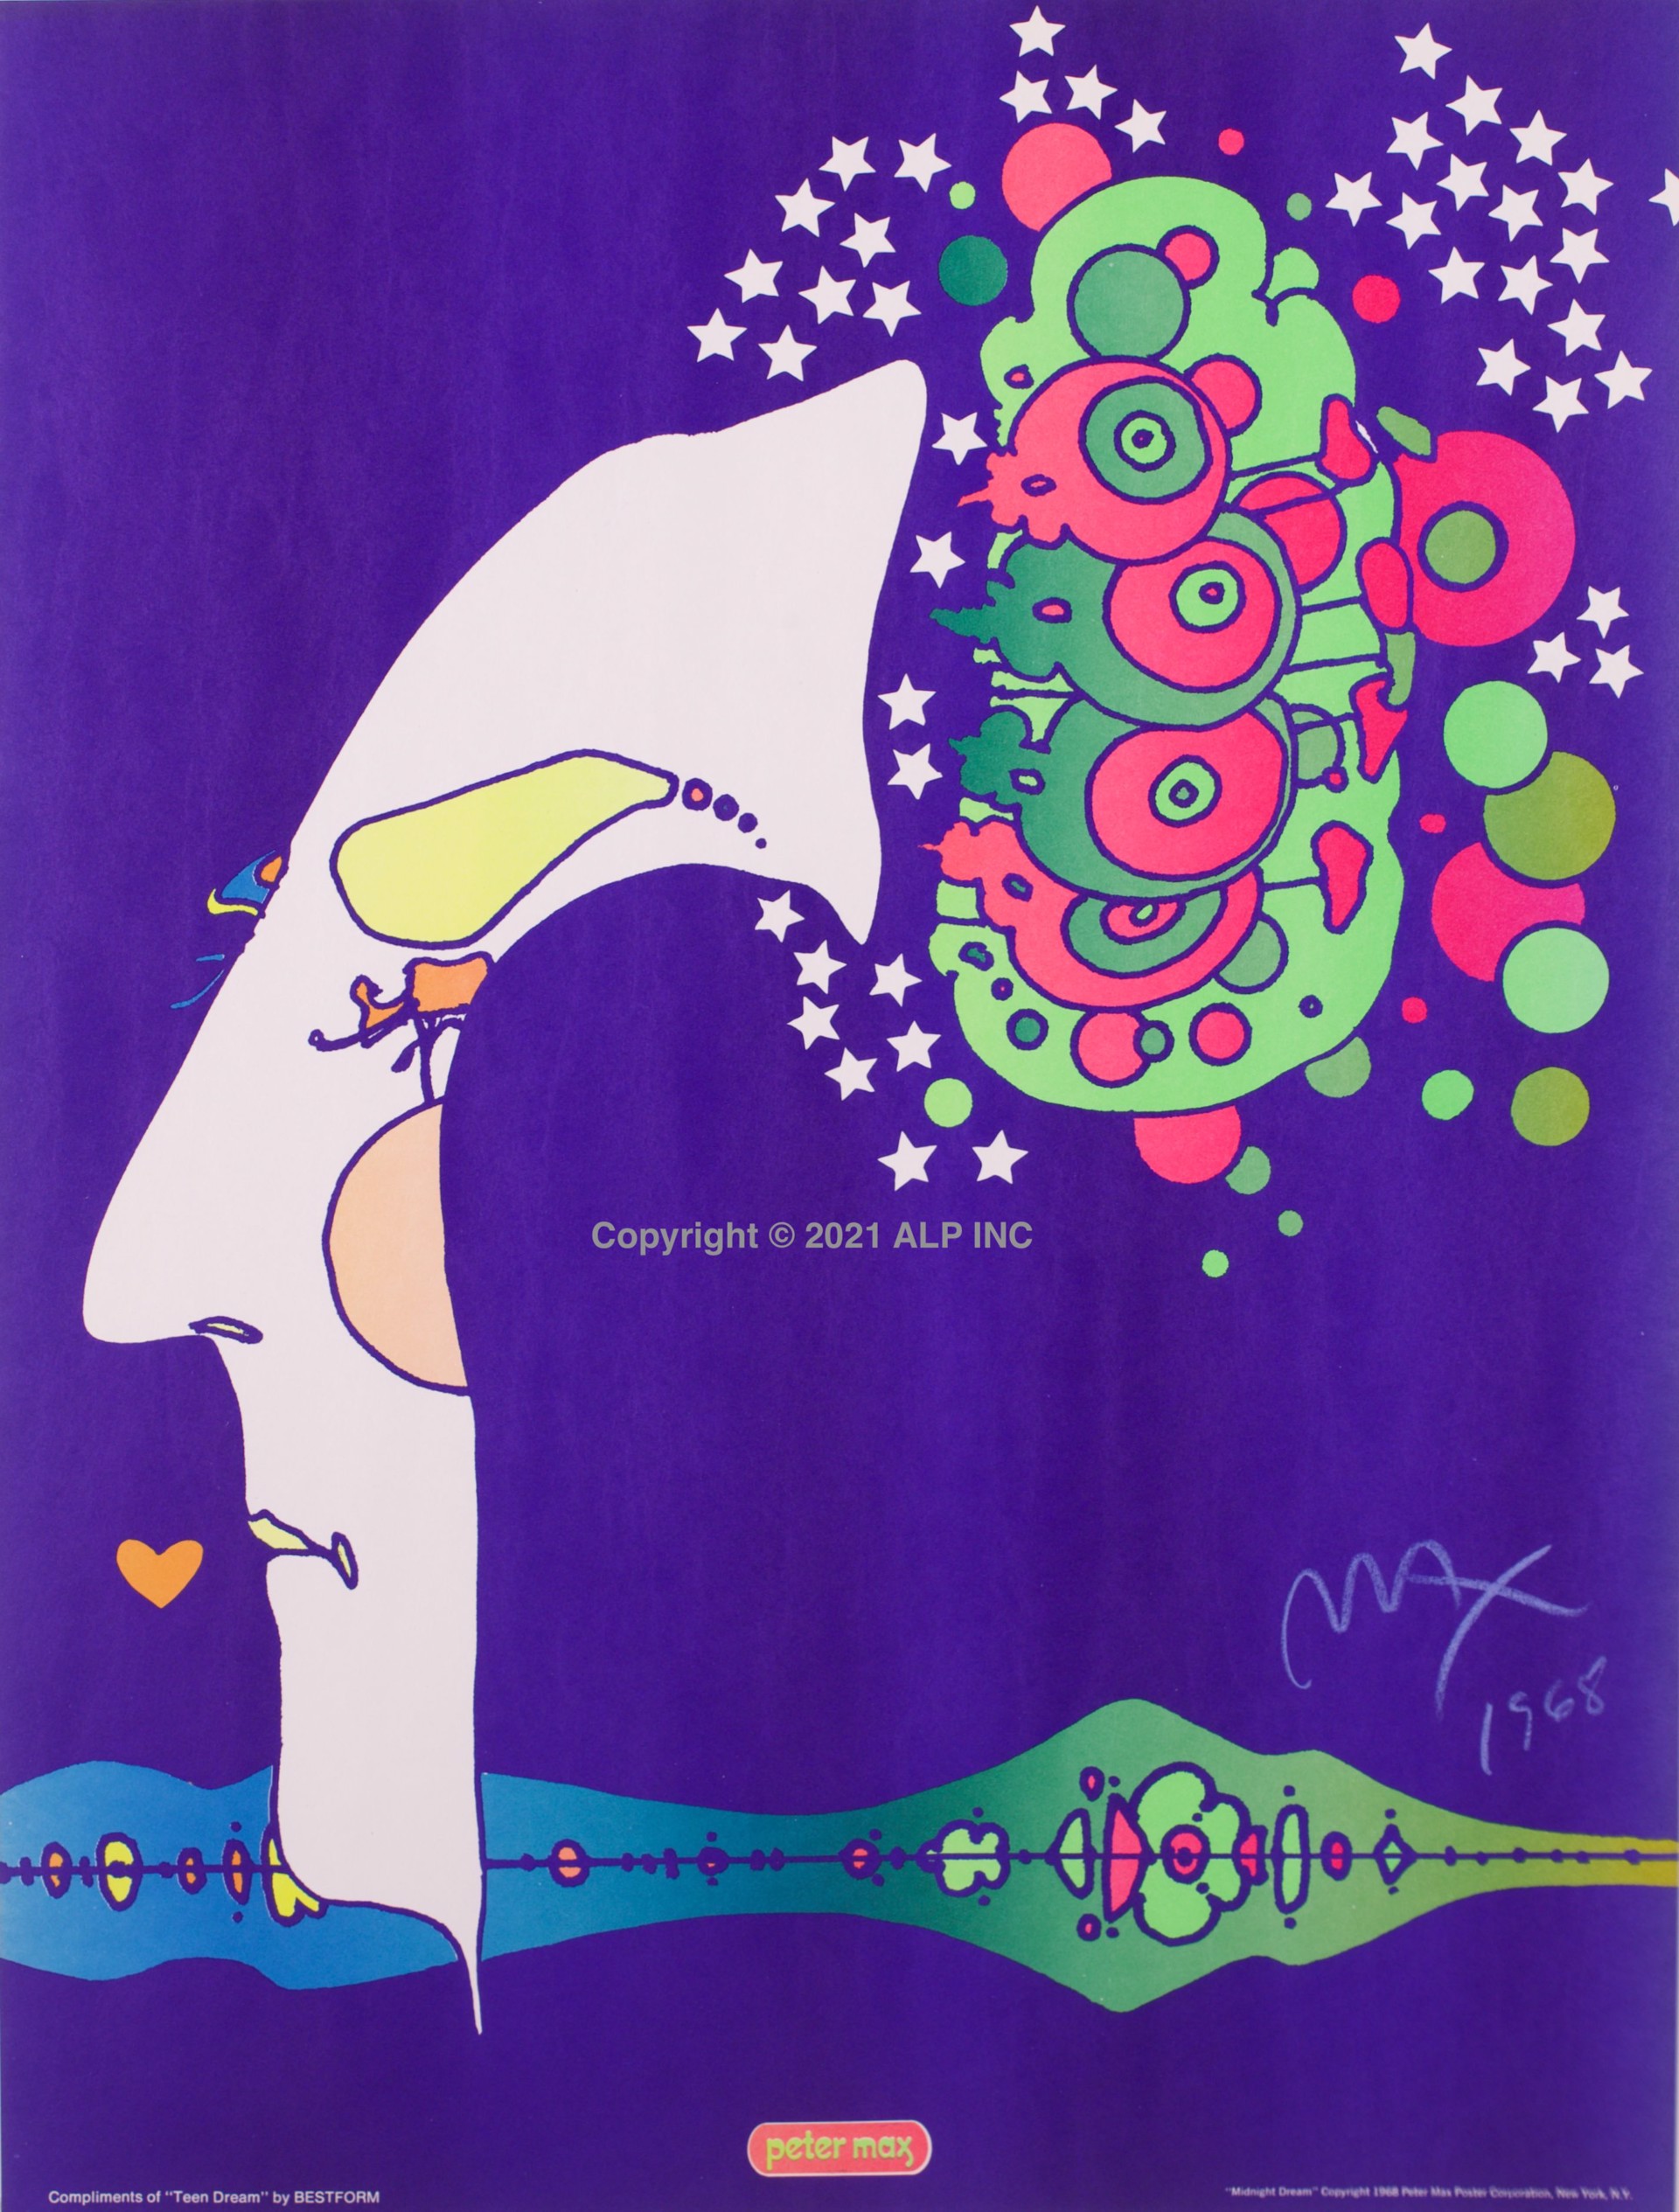 Teen Dream by Peter Max